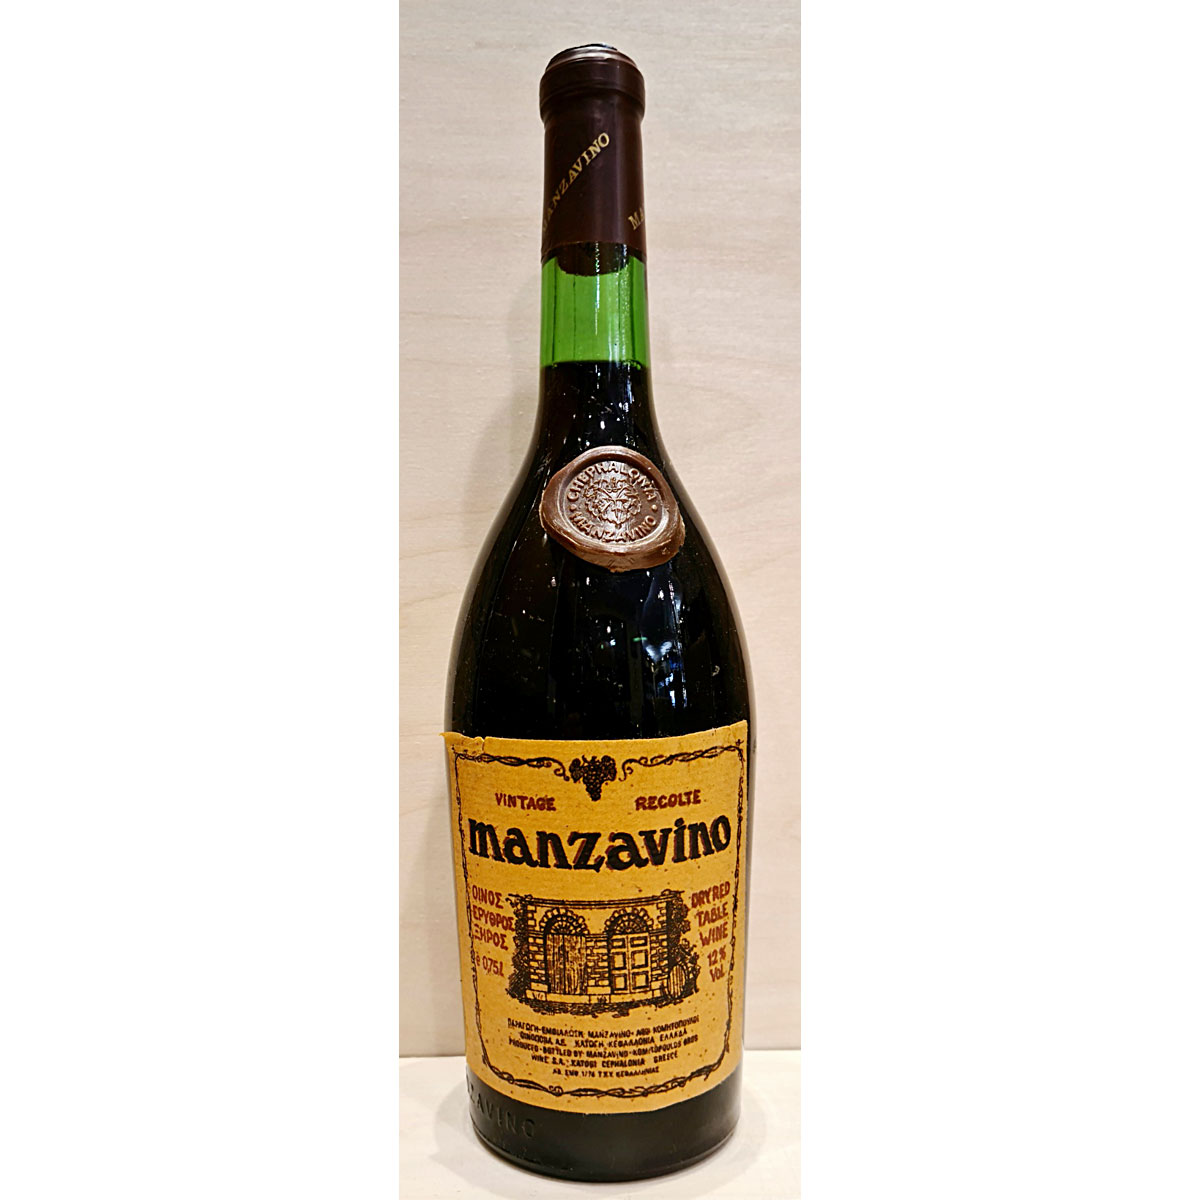 a bottle of Manzavino Vintage Recolte red